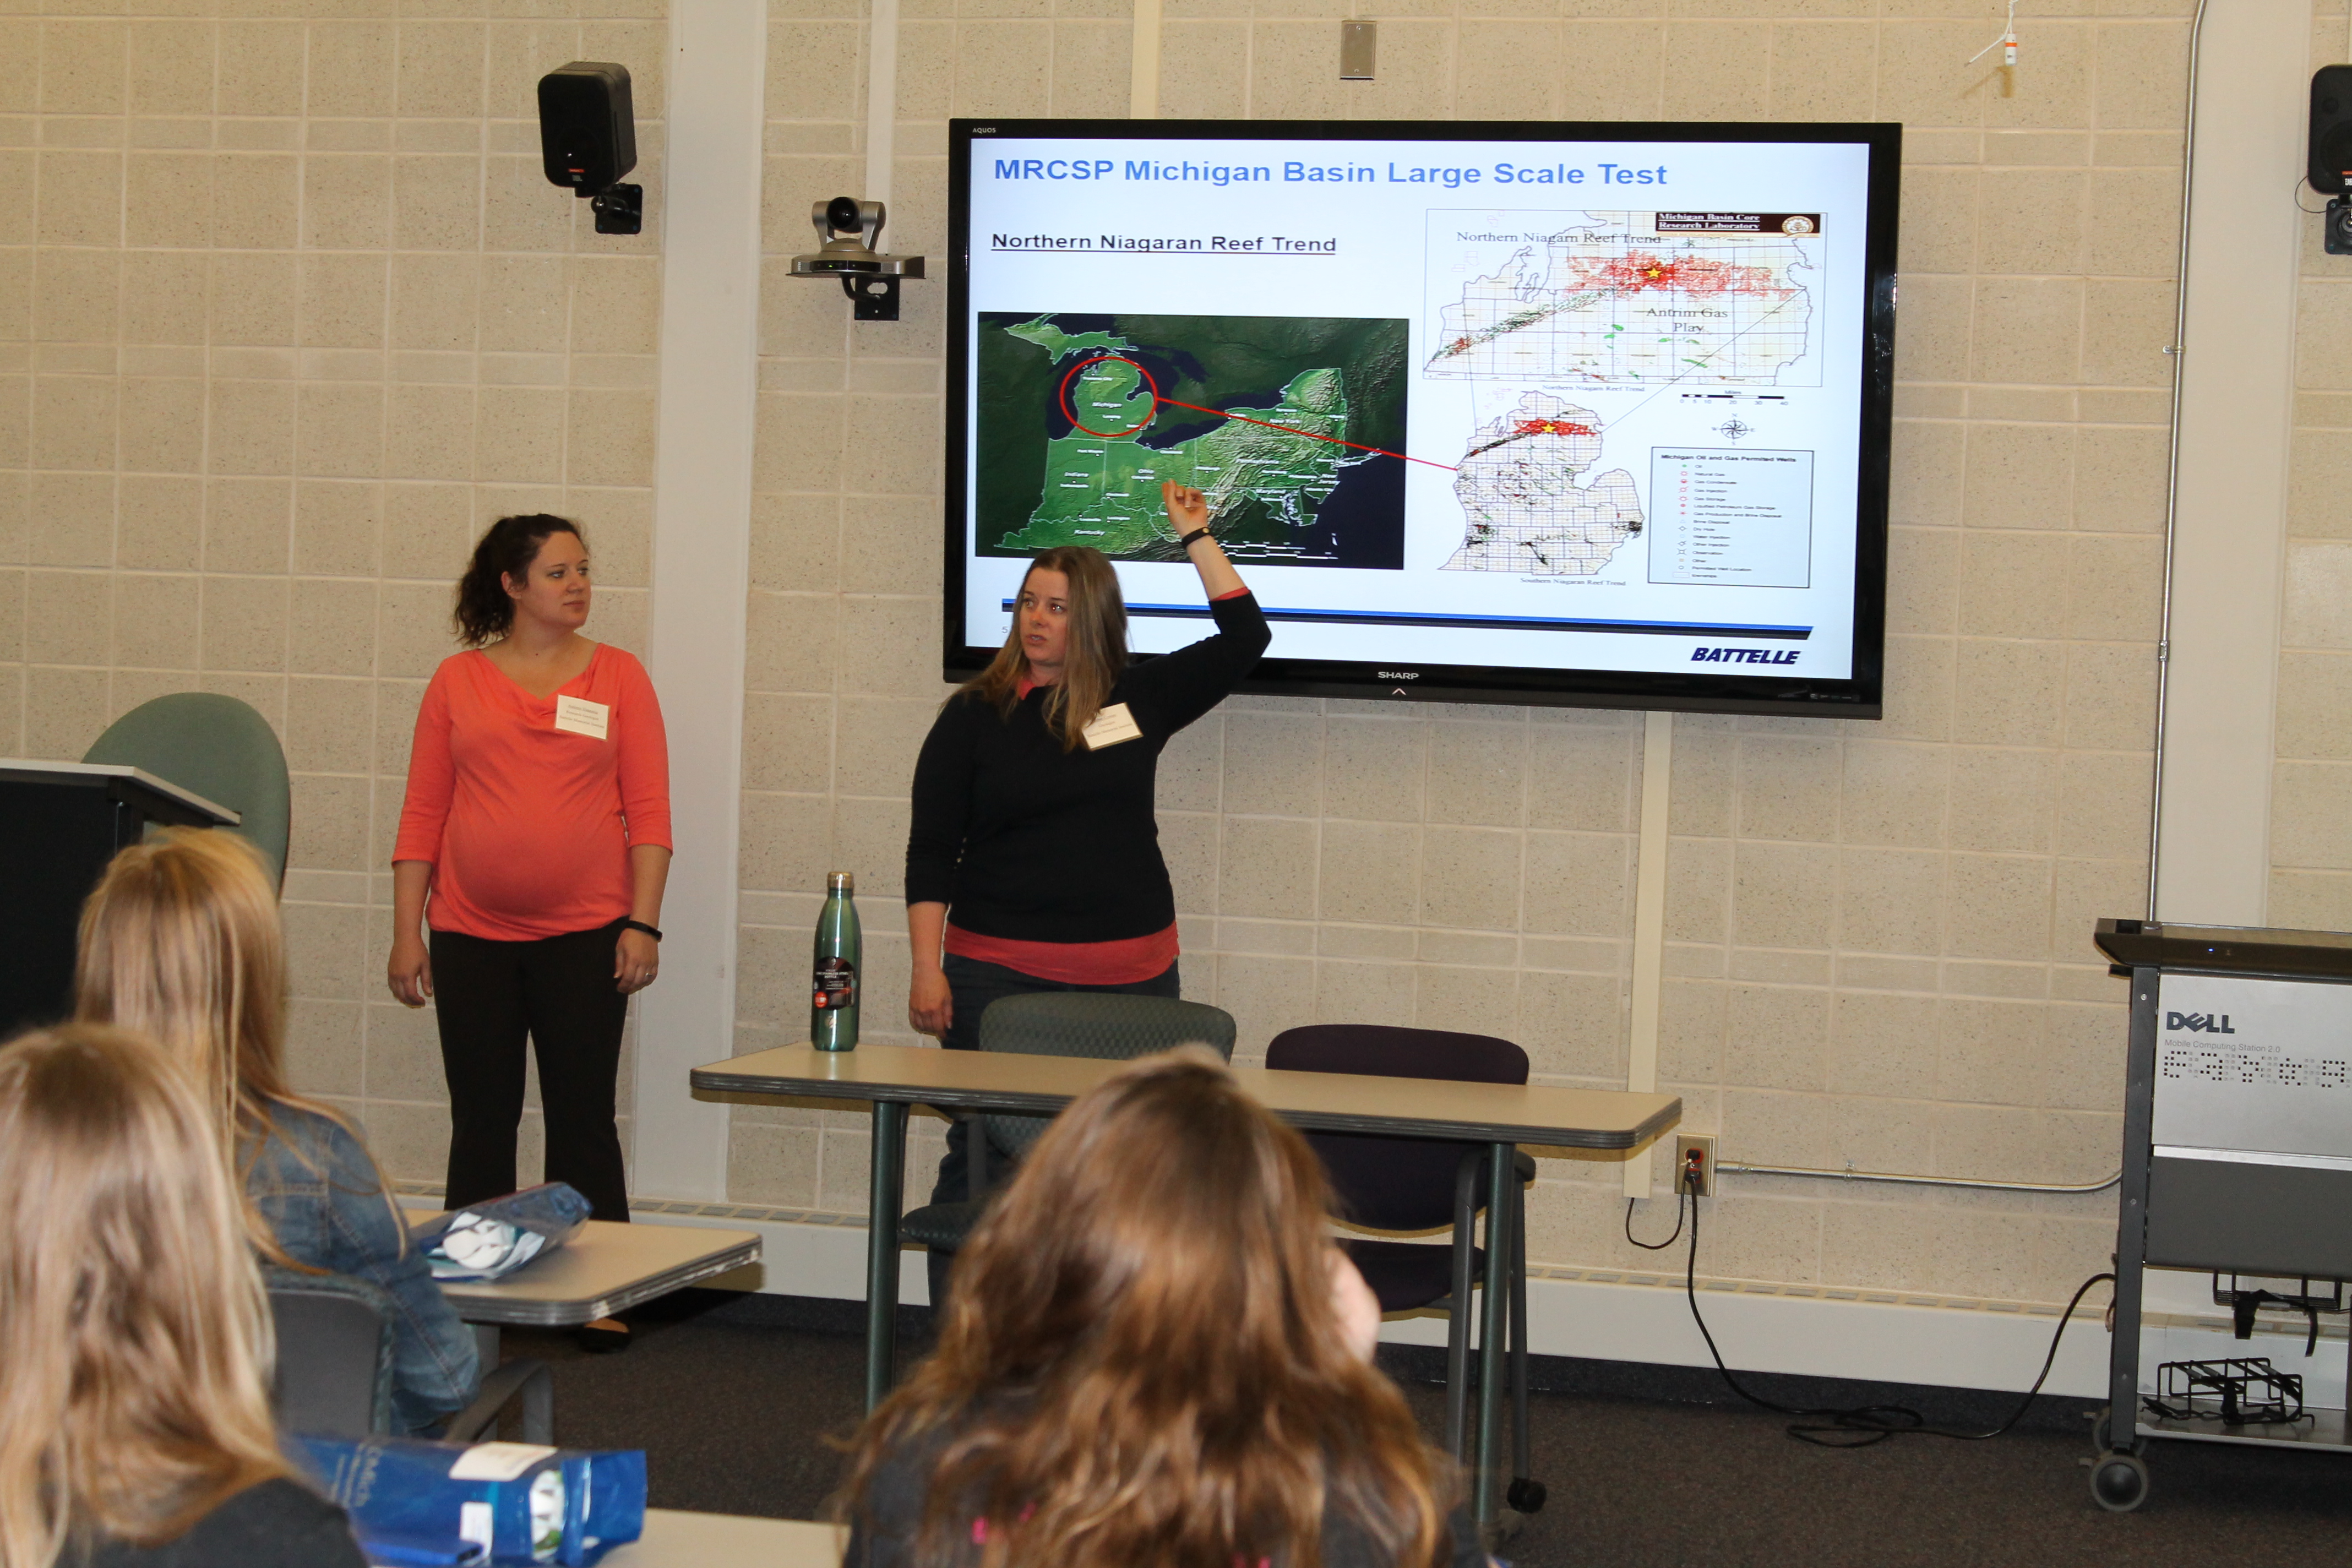 Photographs from a 2017 science, technology, engineering, and mathematics (STEM) outreach activity in Gaylord, Michigan, teaching middle school girls about Michigan geology and CCUS.